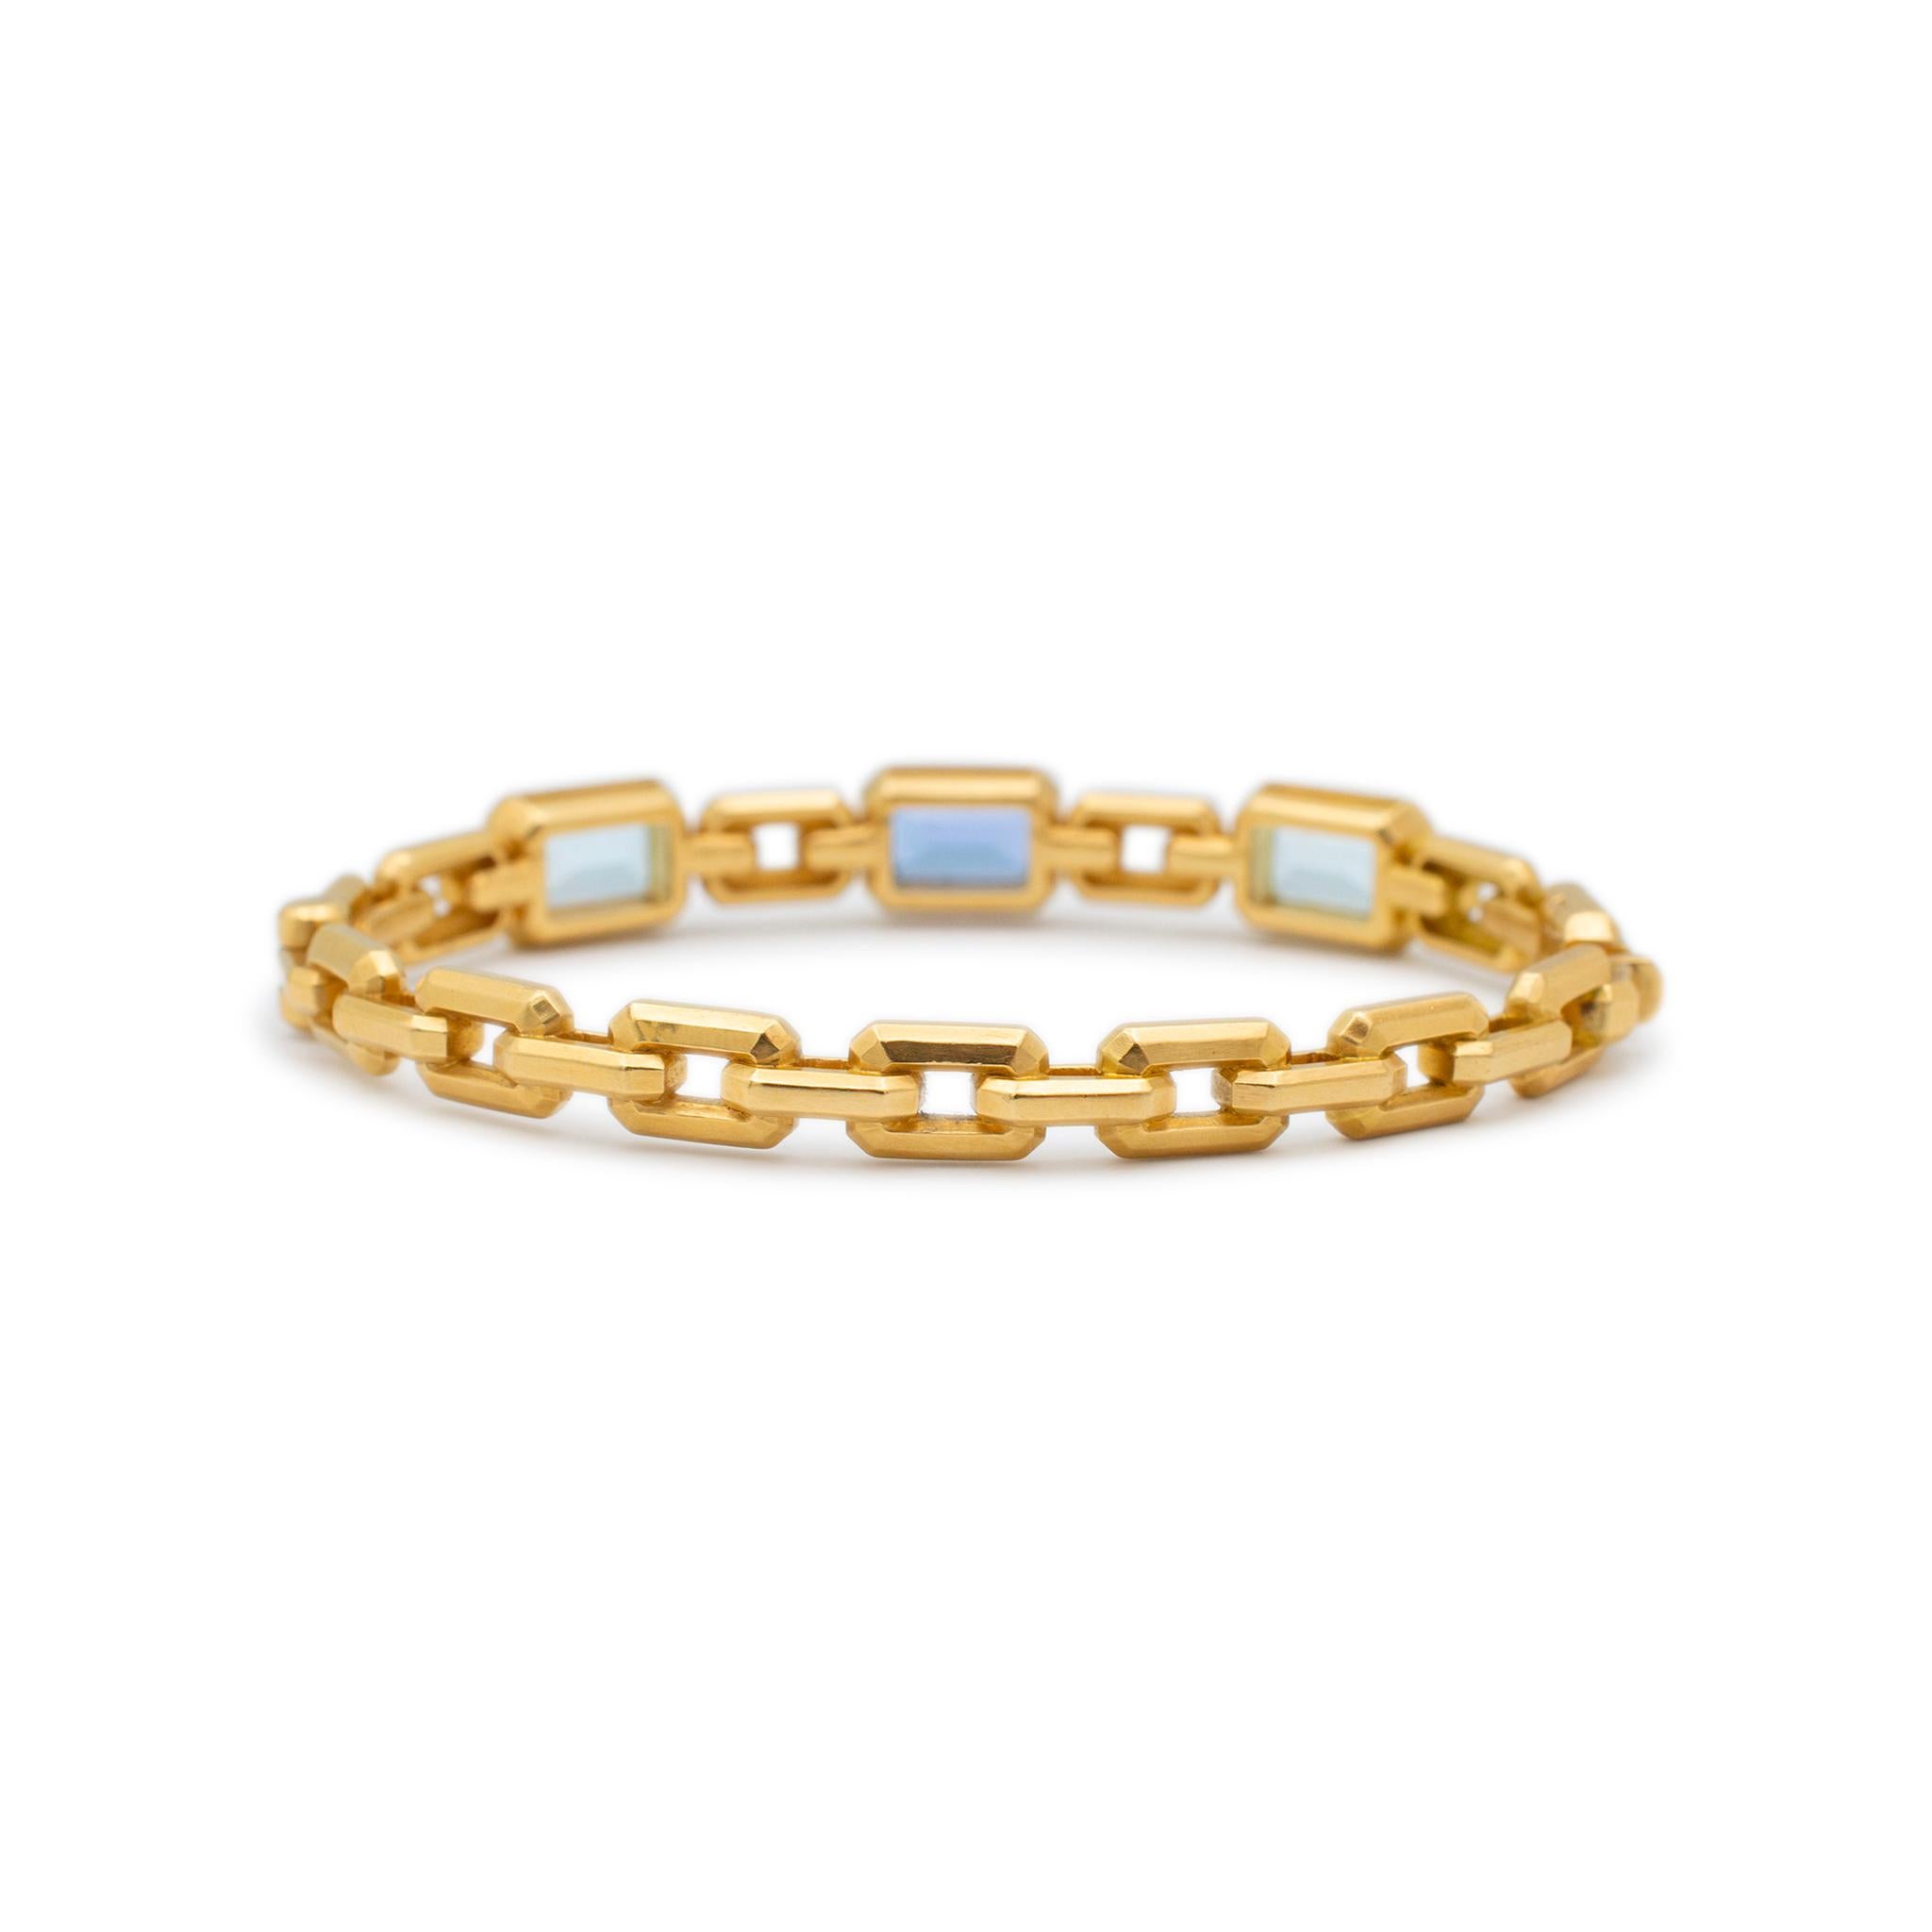 Brand: David Yurman

Gender: Ladies

Metal Type: 18K Yellow Gold

Length: 6.00 inches

Width: 8.45 mm

Weight: 32.52 grams

18K yellow gold tanzanite and blue topaz bangle bracelet. The metal was tested and determined to be 18K yellow gold. Engraved